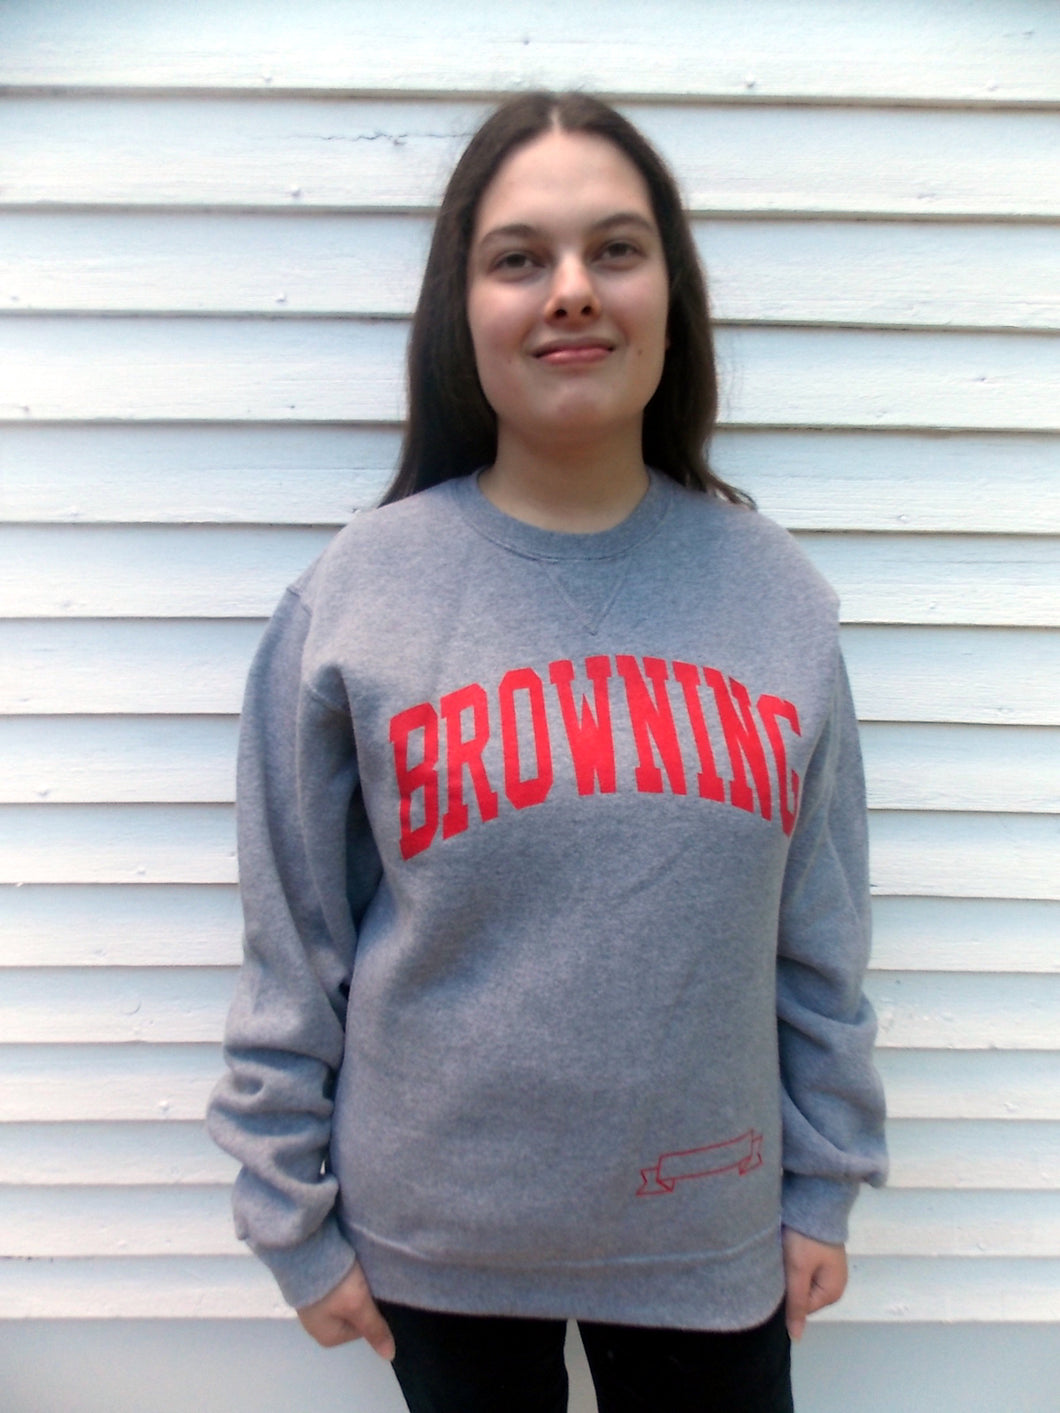 Russell Browning Athletic Sweatshirt S Gray & Red